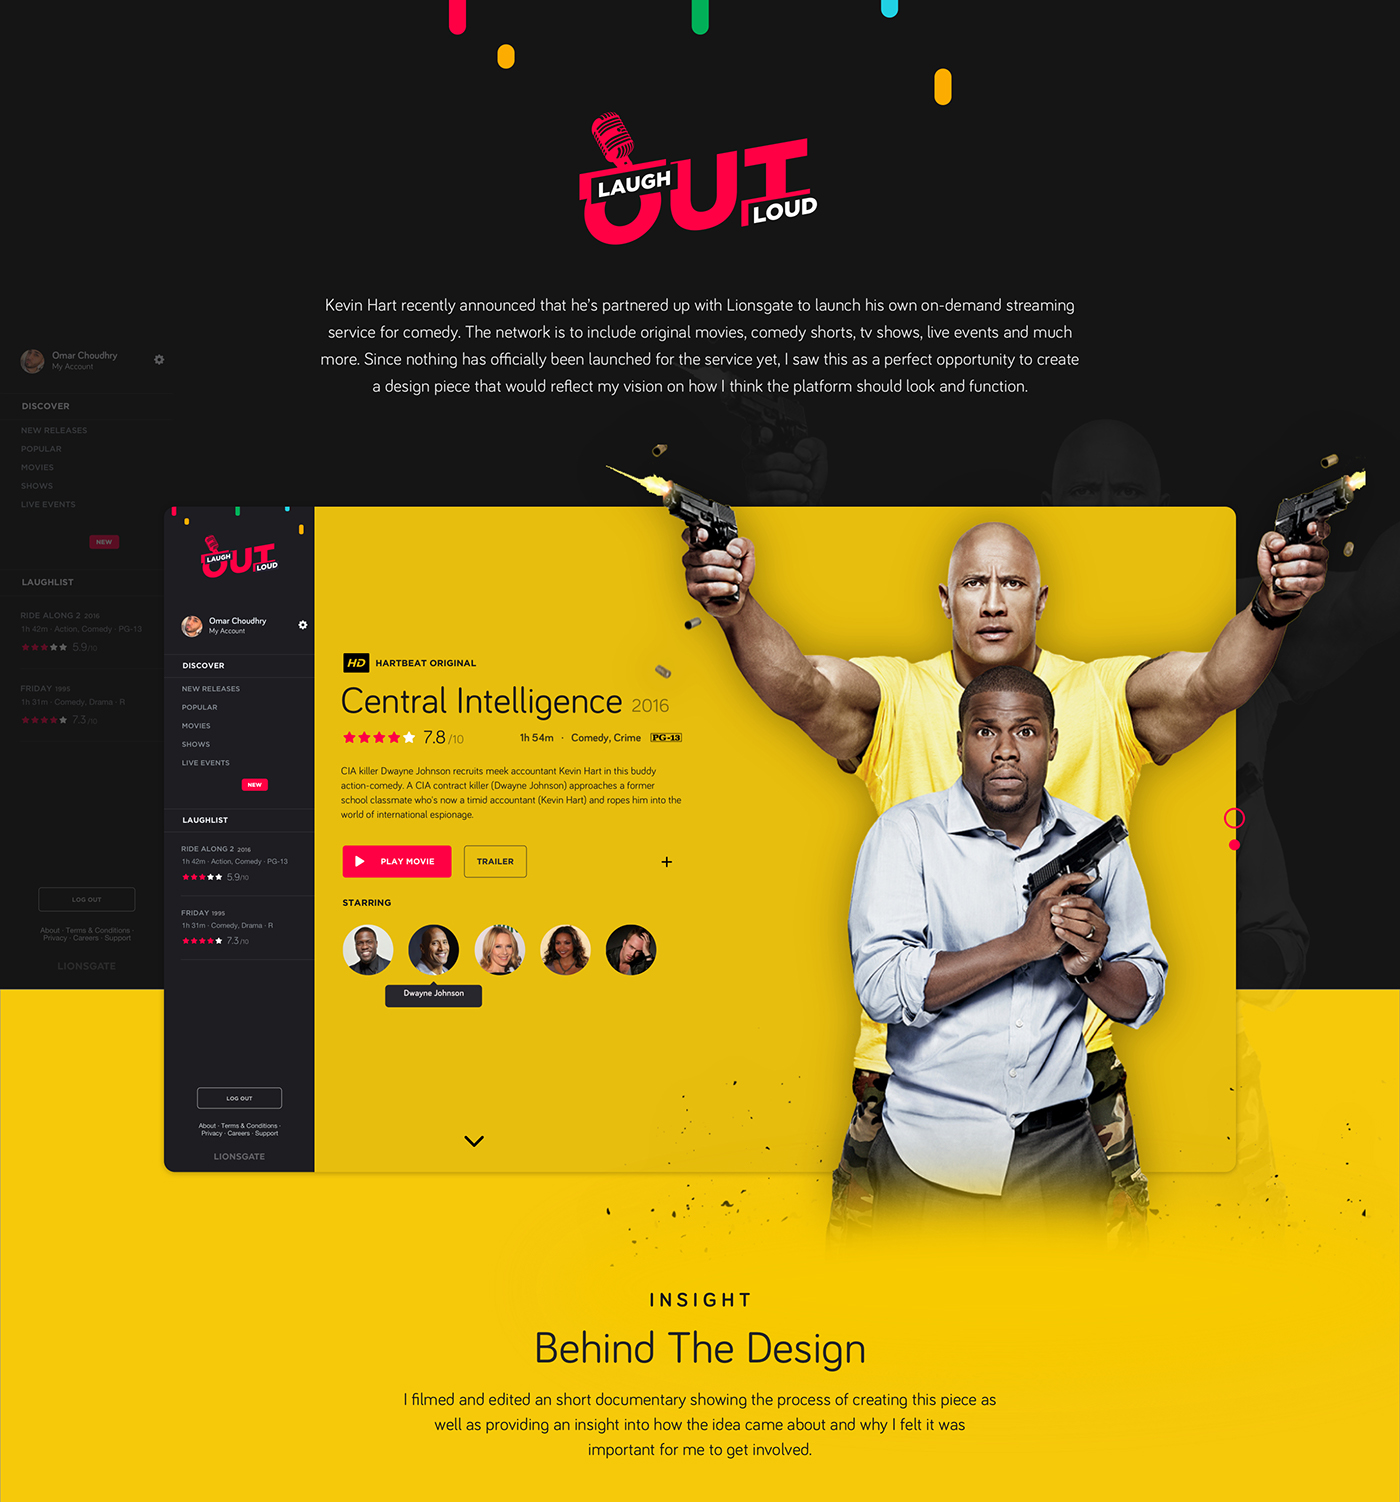 kevin hart  design concept Laugh Out Loud dashboard movie network profile design design omar choudhry user interface user experience